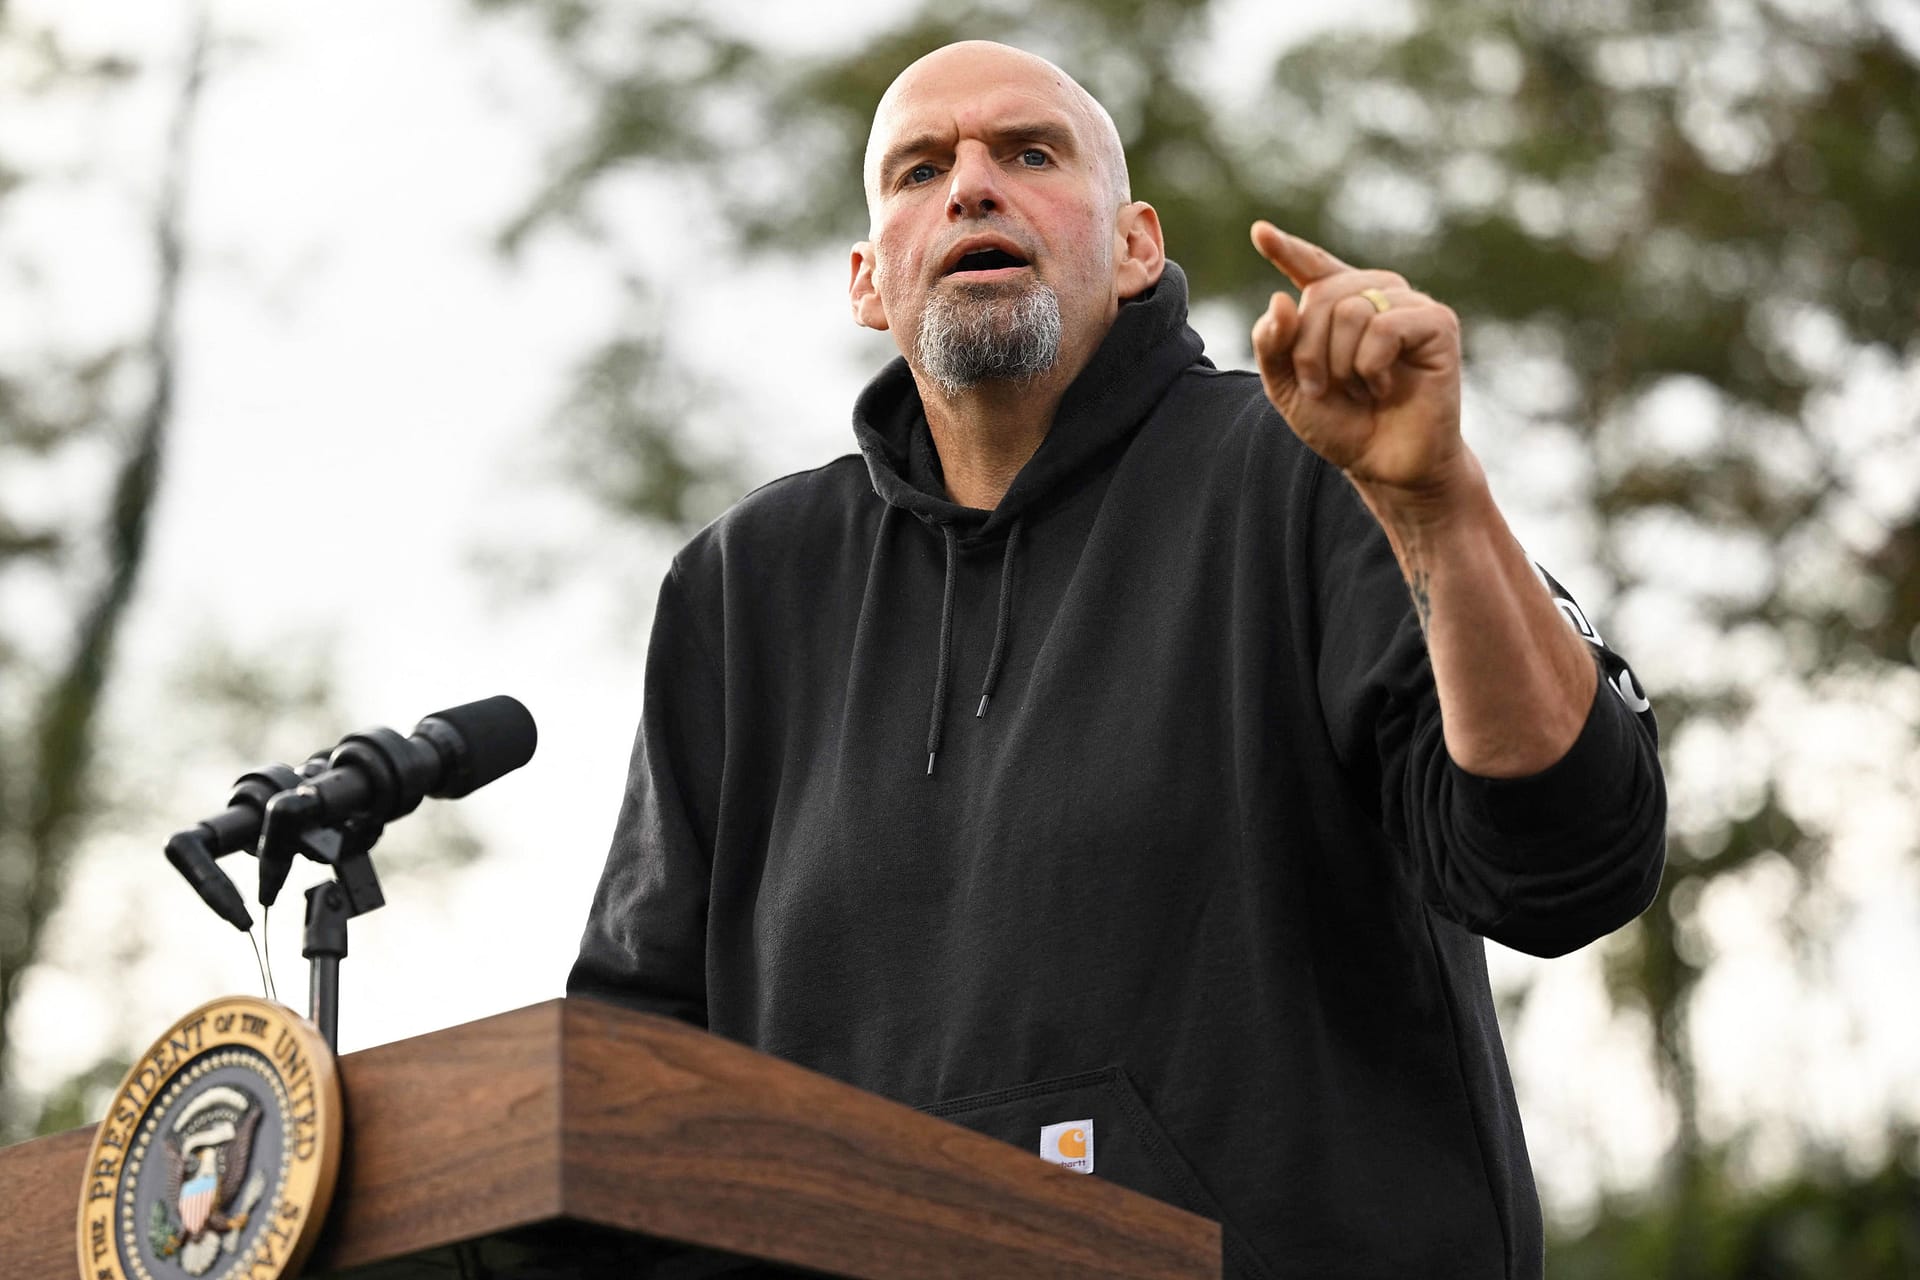 Democrats are focus-grouping Fetterman’s health. Swing voters think he’s getting sharper.